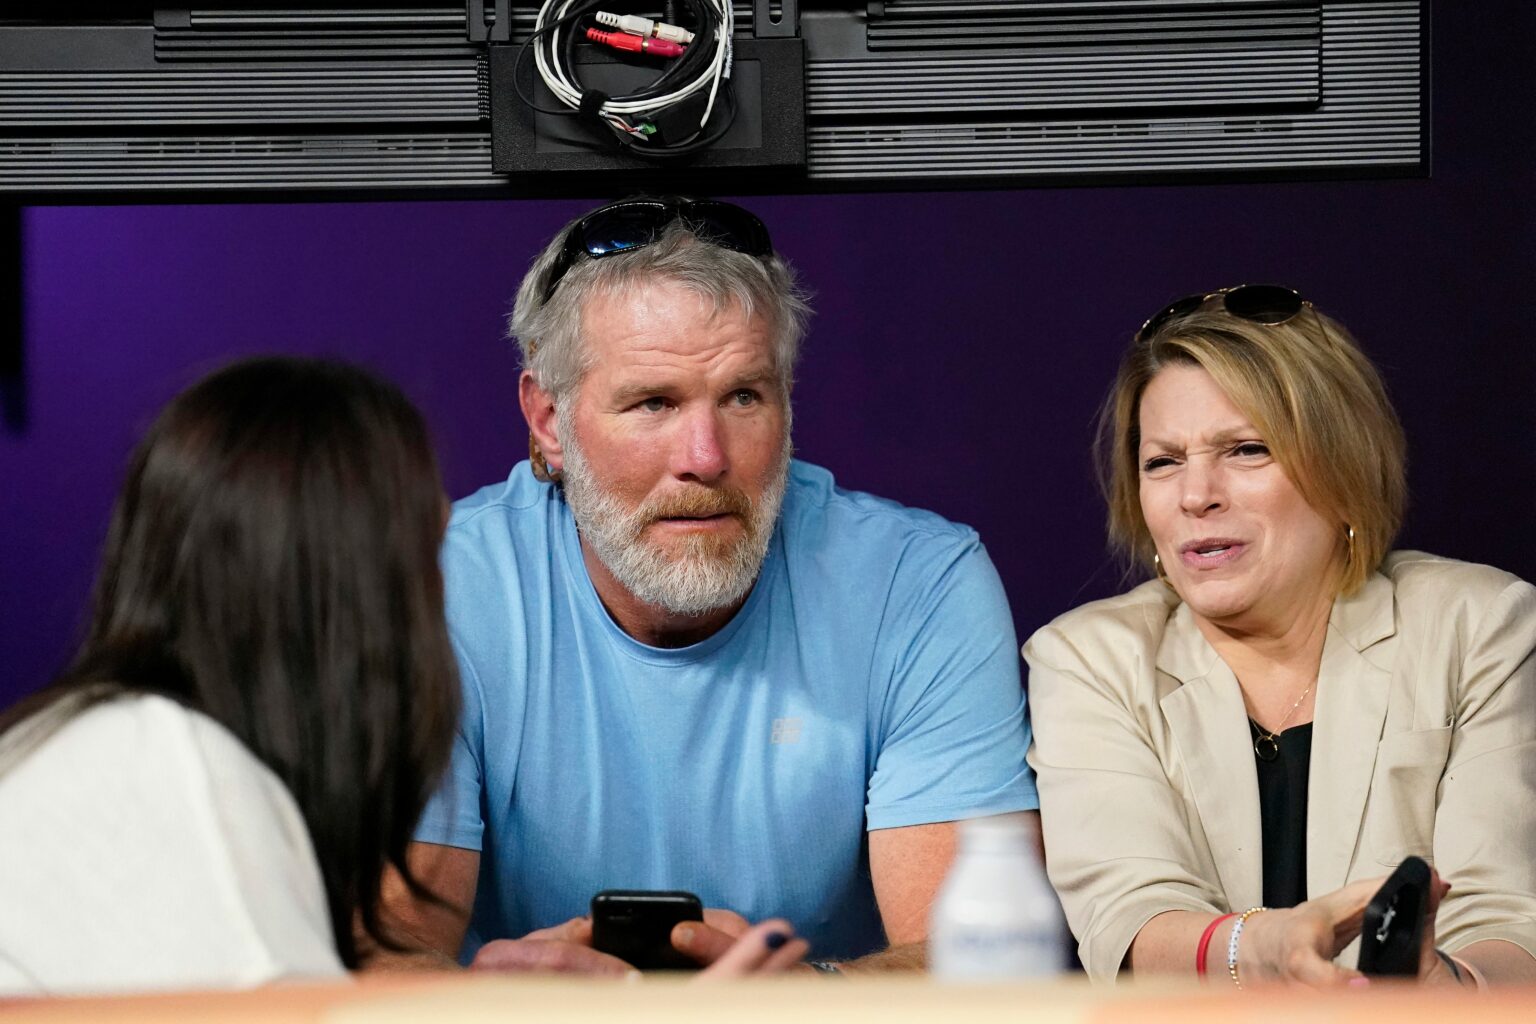 Former NFL quarterback Brett Favre watches from a suite in the third quarter of Super Bowl 56 between the Cincinnati Bengals and the Los Angeles Rams at SoFi Stadium in Inglewood, Calif., on Sunday, Feb. 13, 2022. The Rams came back in the final minutes of the game to win 23-20 on their home field. © Sam Greene/Cincinnati Enquirer / USA TODAY NETWORK (Green Bay Packers)